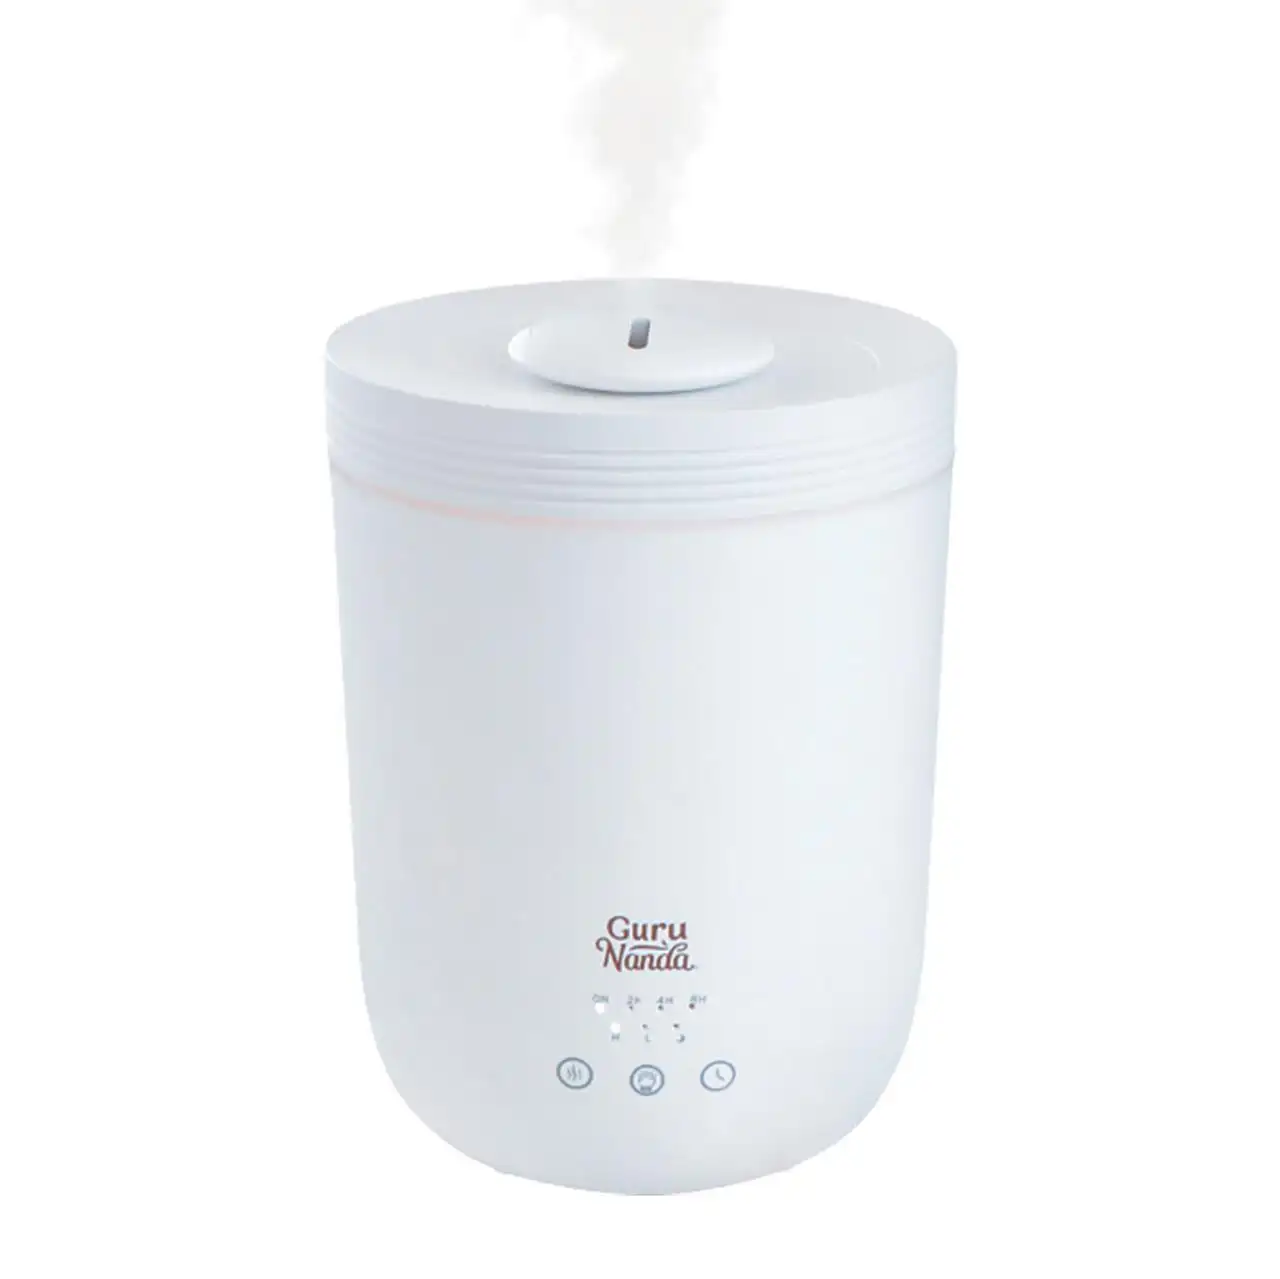 Halo XL Essential Oil Diffuser & Humidifier, Large Capacity, 22 Hour Run Time with Light & Sleep Modes